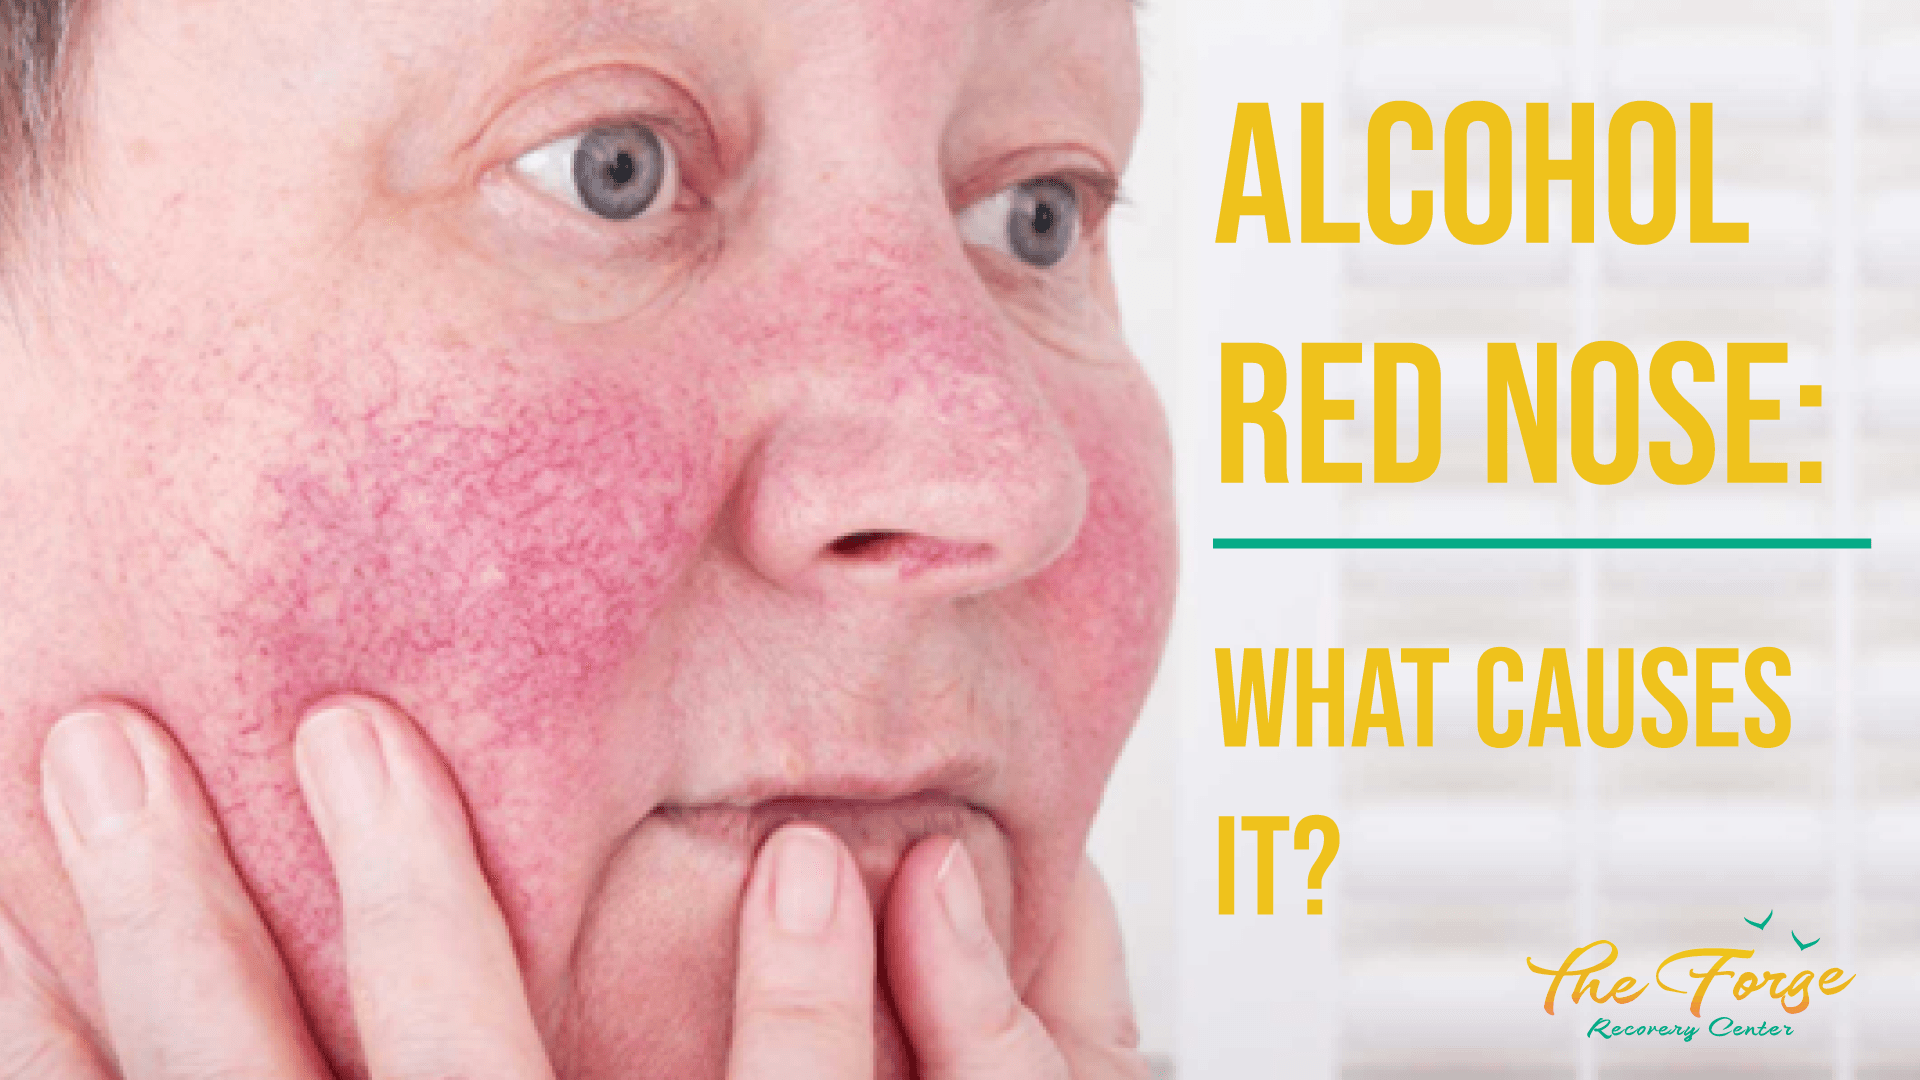 What is Alcohol Red Nose?